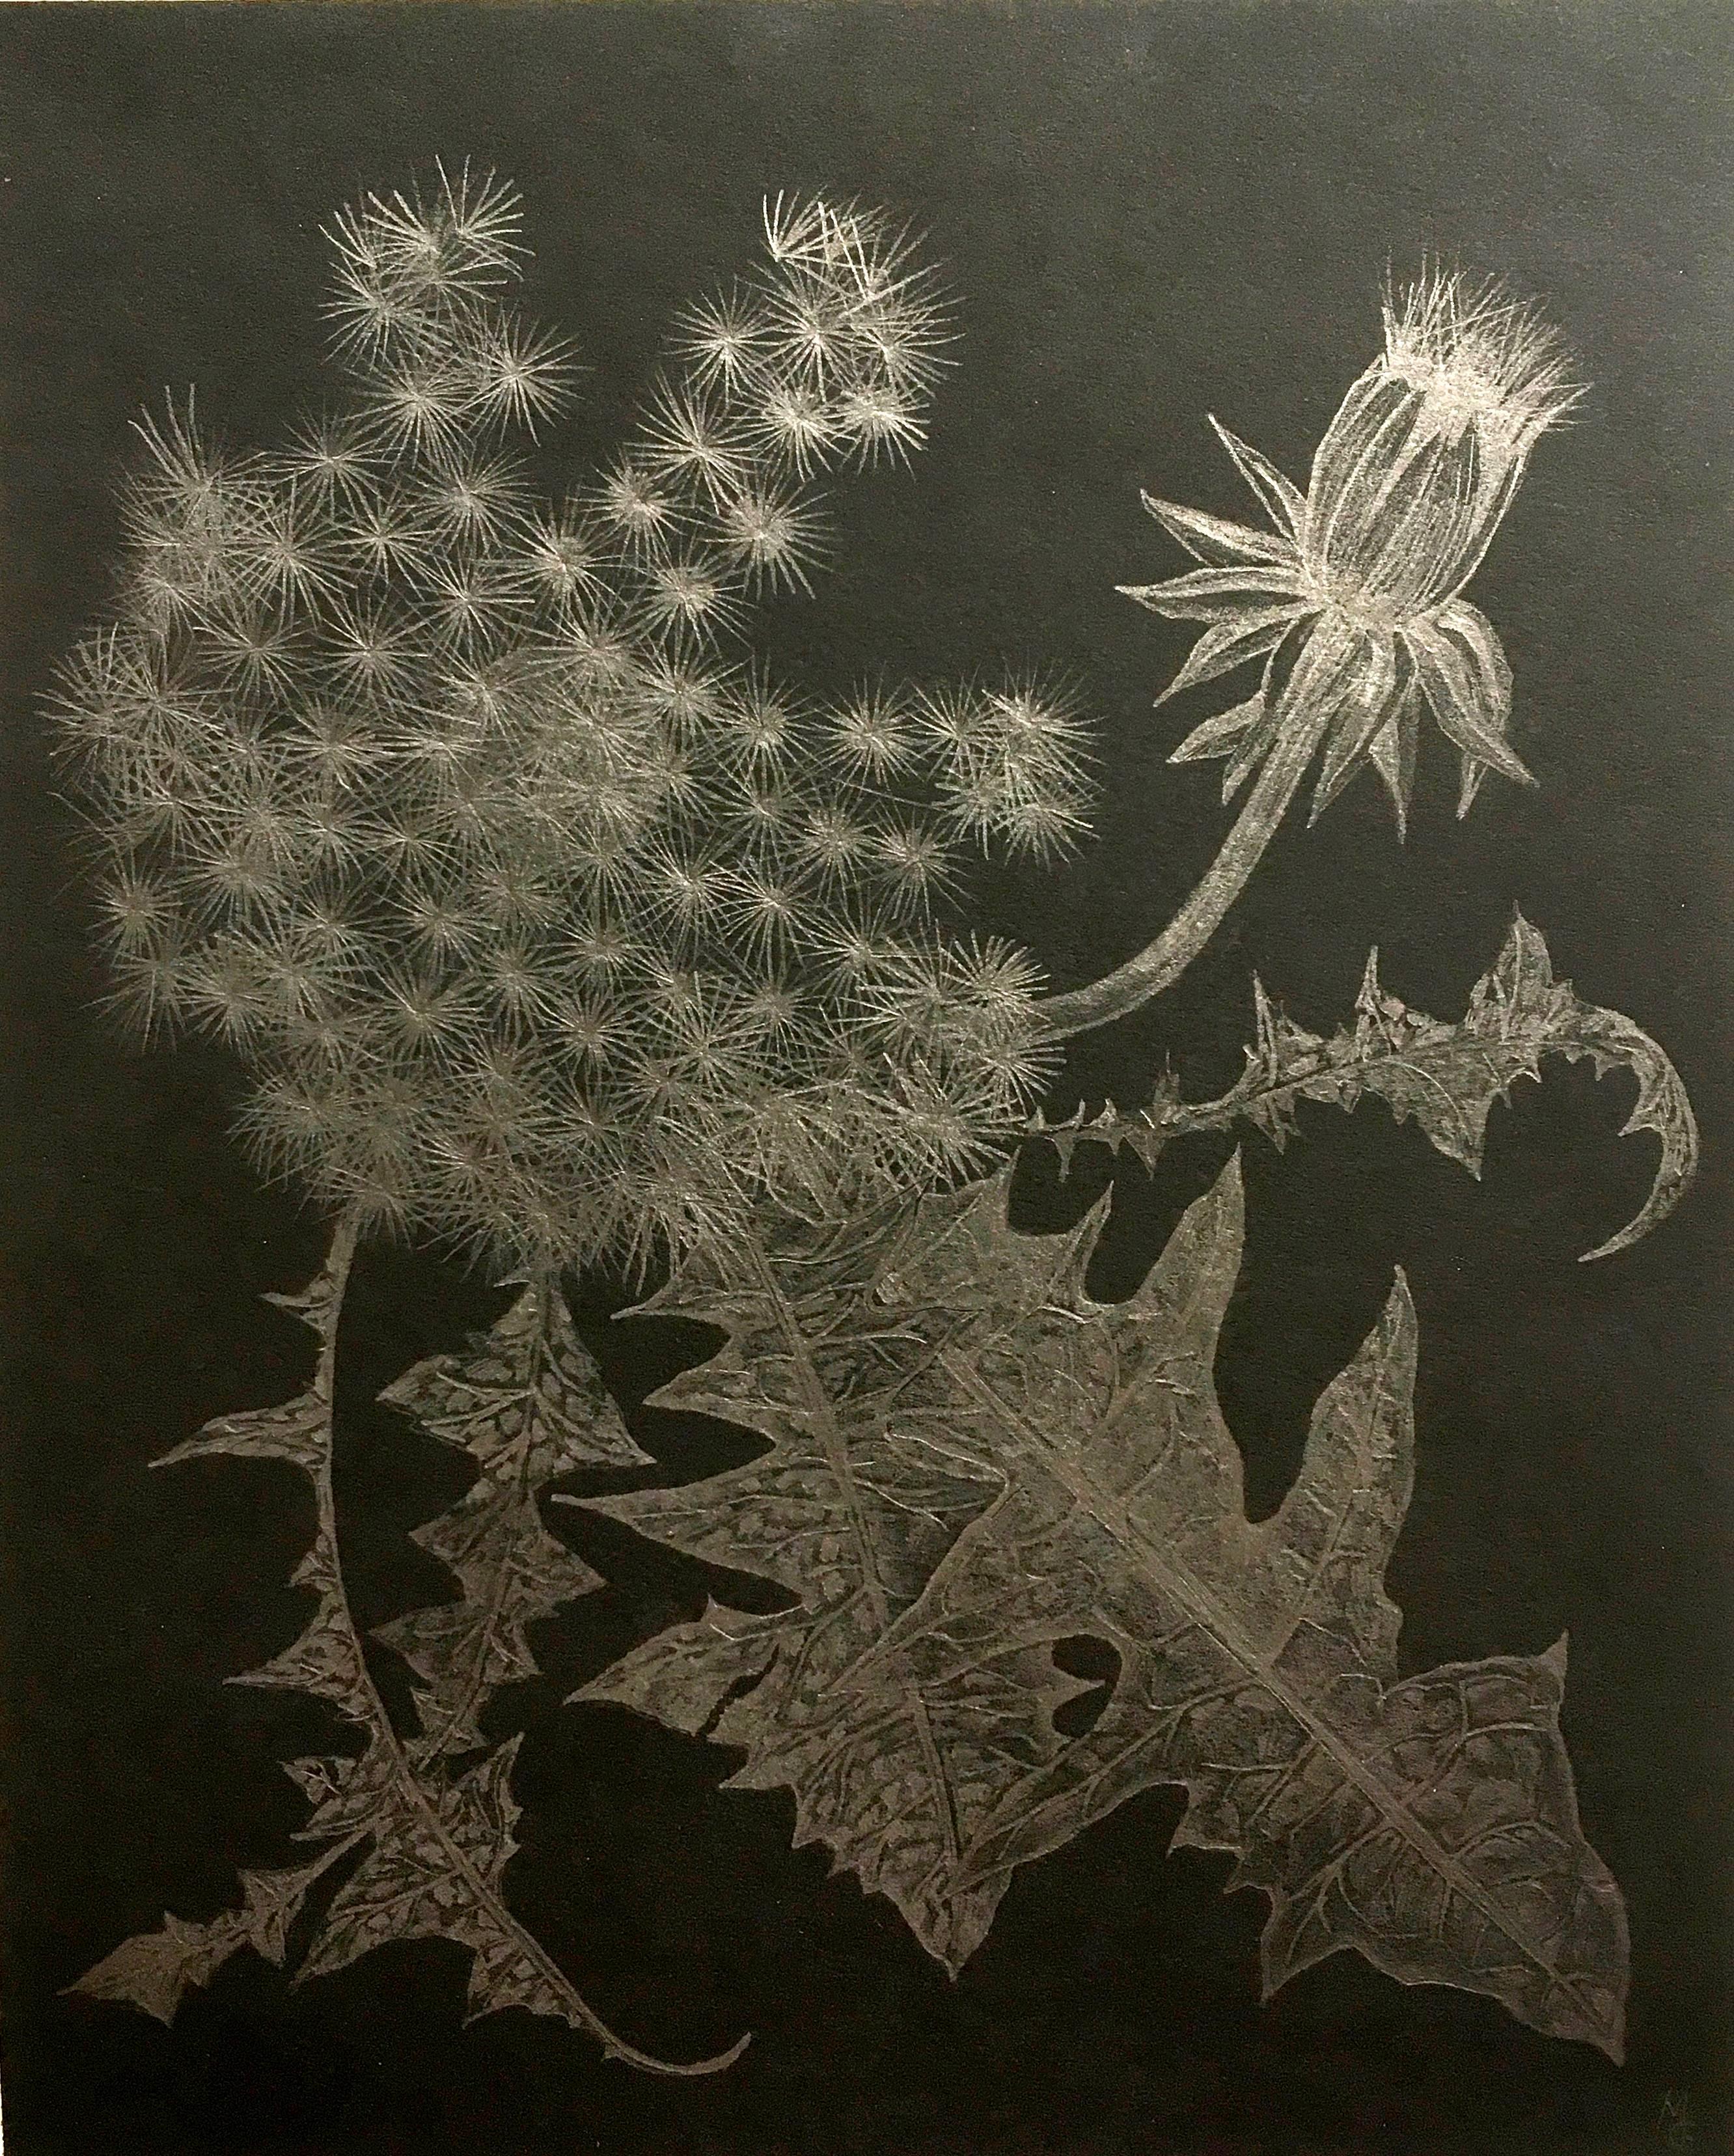 Margot Glass captures the lace-like delicacy of her subject in her graphite realist drawing on paper, "Dandelion with Bud," 2018. This intimate study of the puffy flower endows the fragility of its seeds with a sense of permanence. 

Provenance: